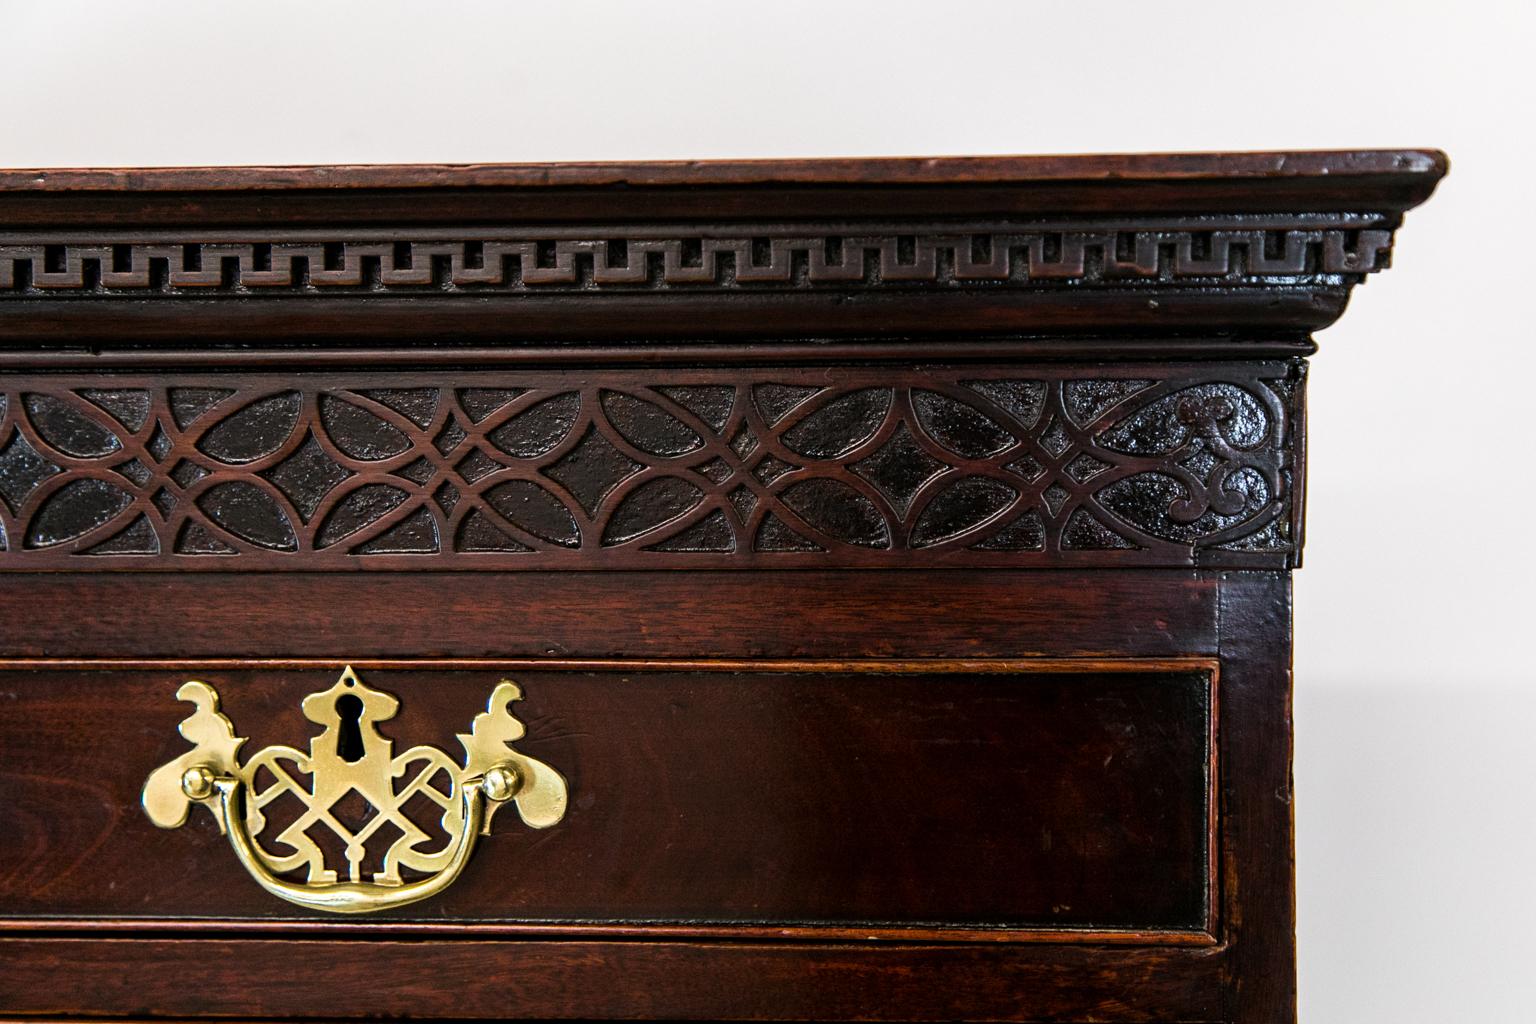 This English mahogany Chippendale tall chest has crown molding featuring the 